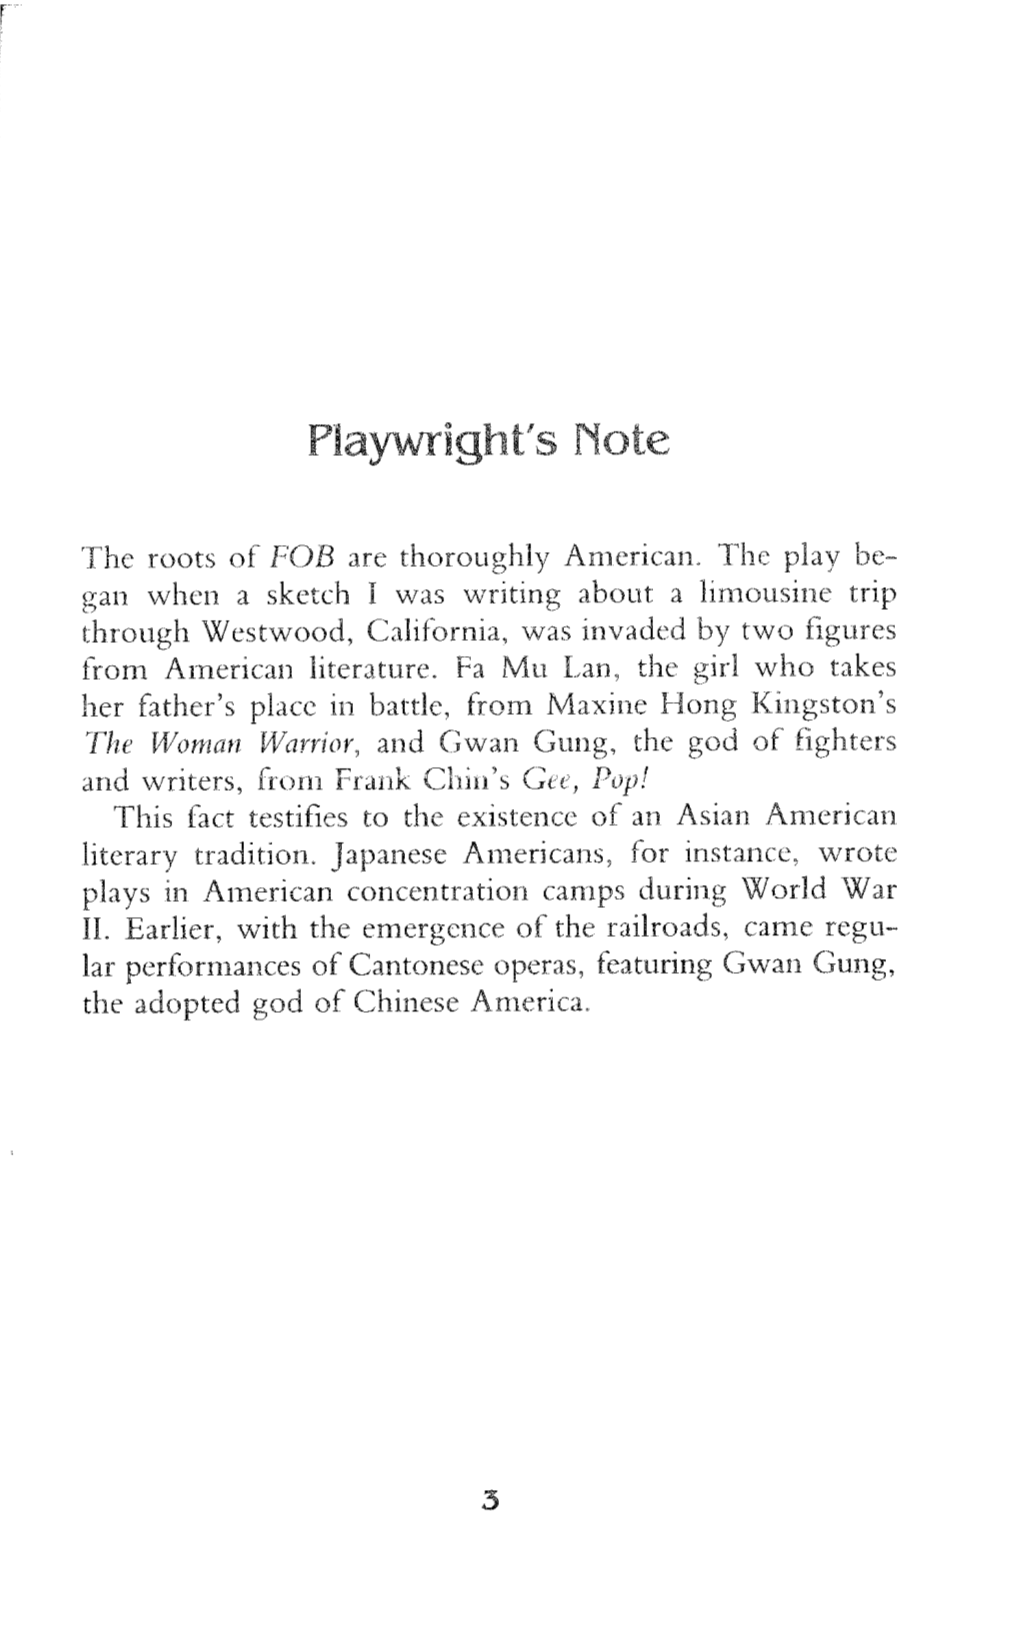 Playwright's Note